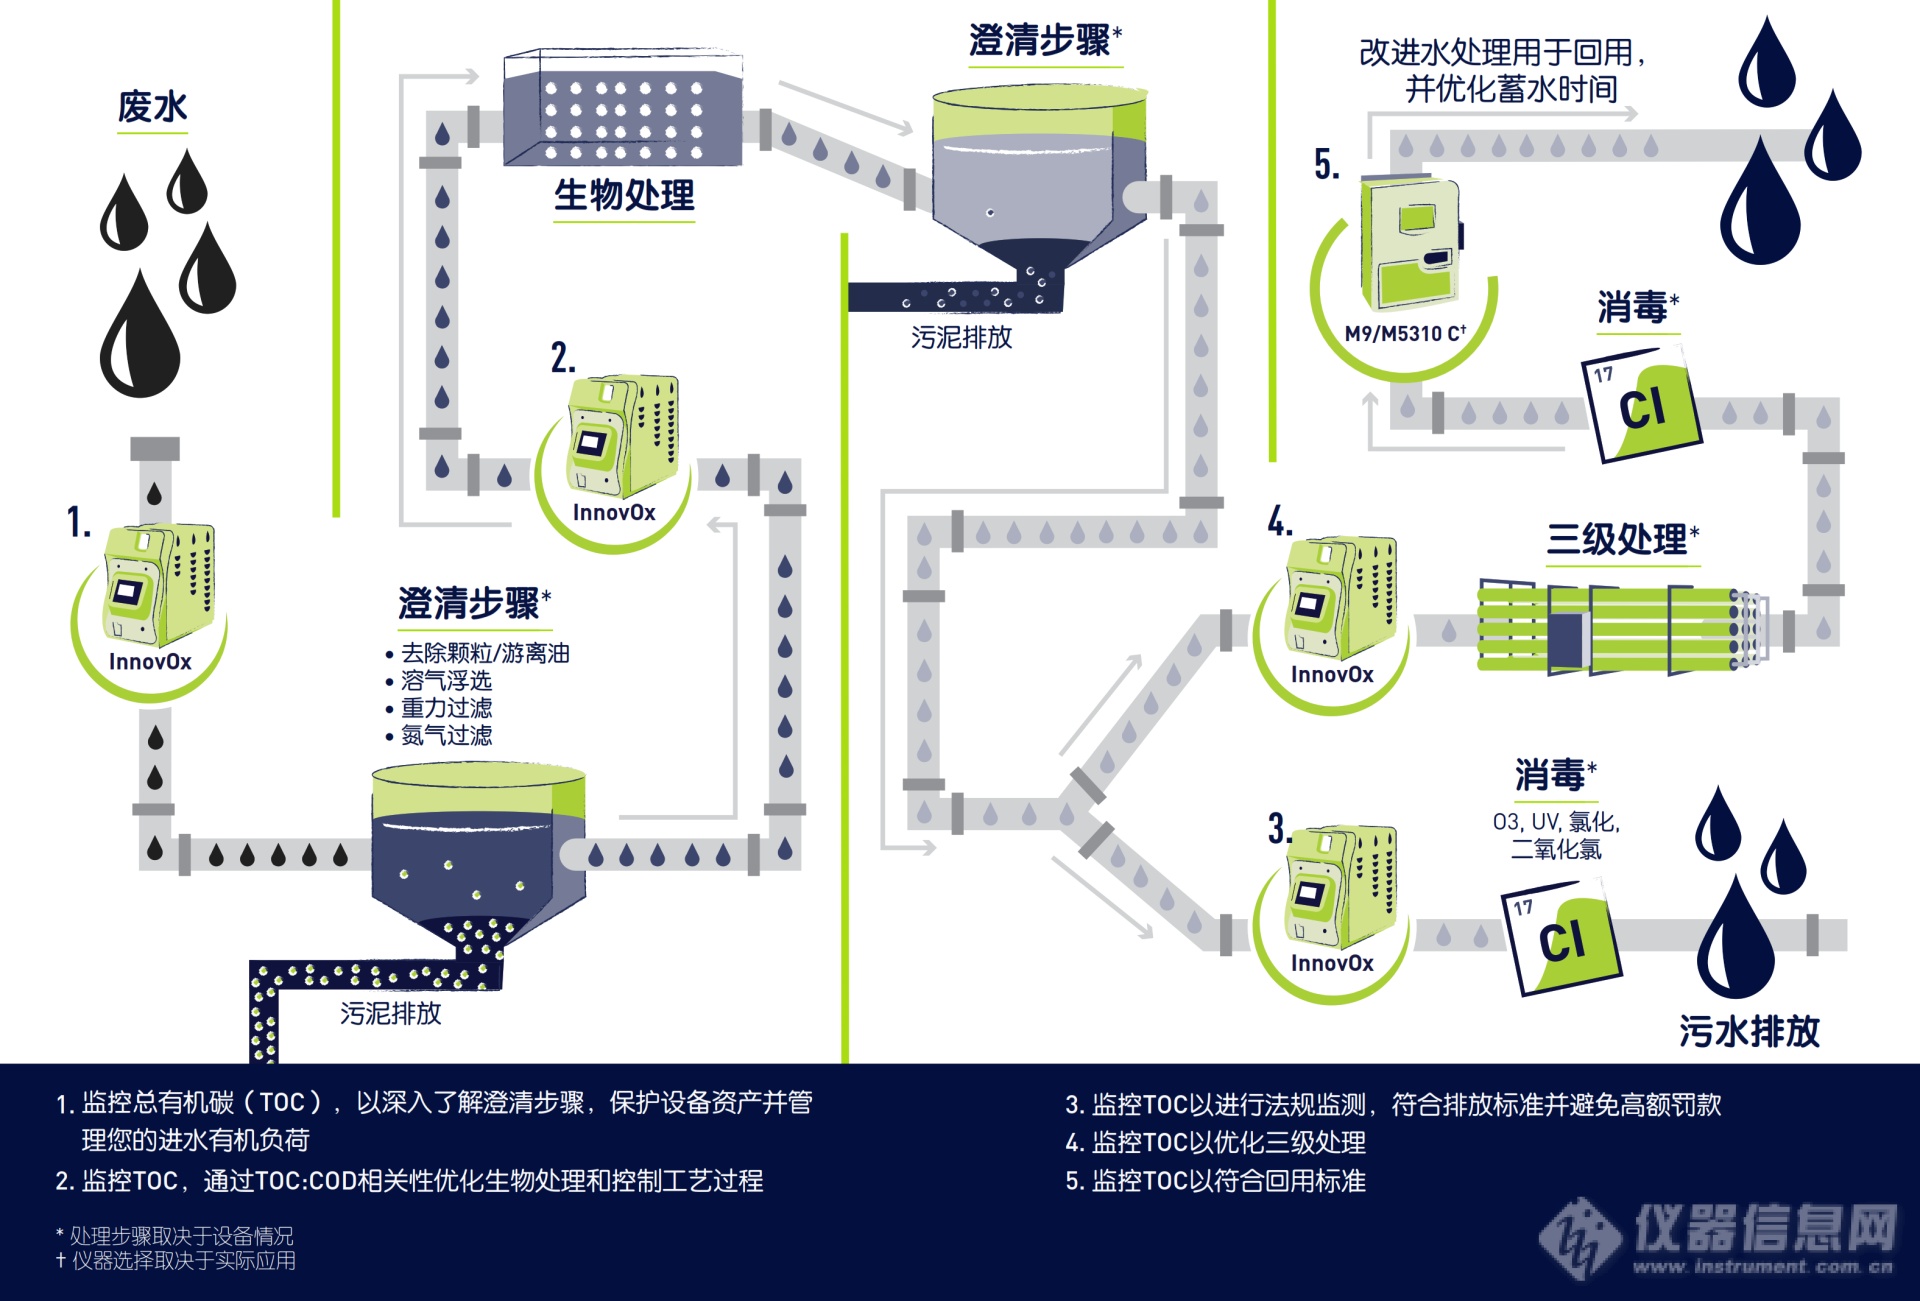 300 40031 infographic_Wastewater_废水处理厂_Rev A_001.png